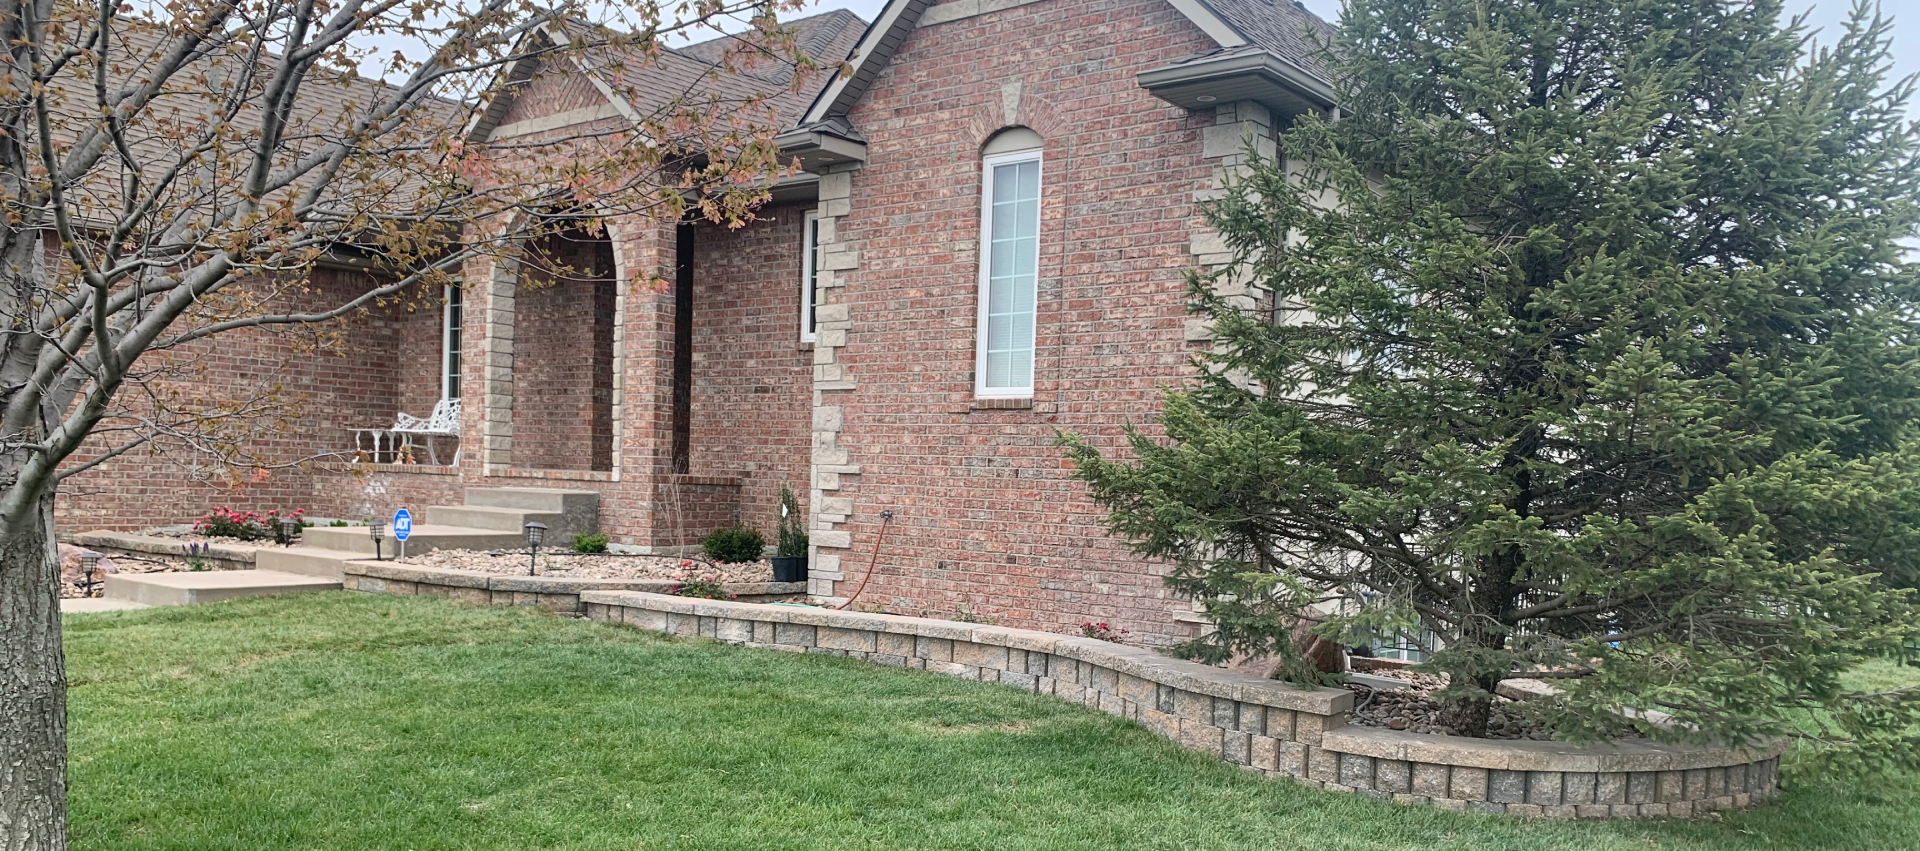 Landscaping Services - Wichita - Hardscapes